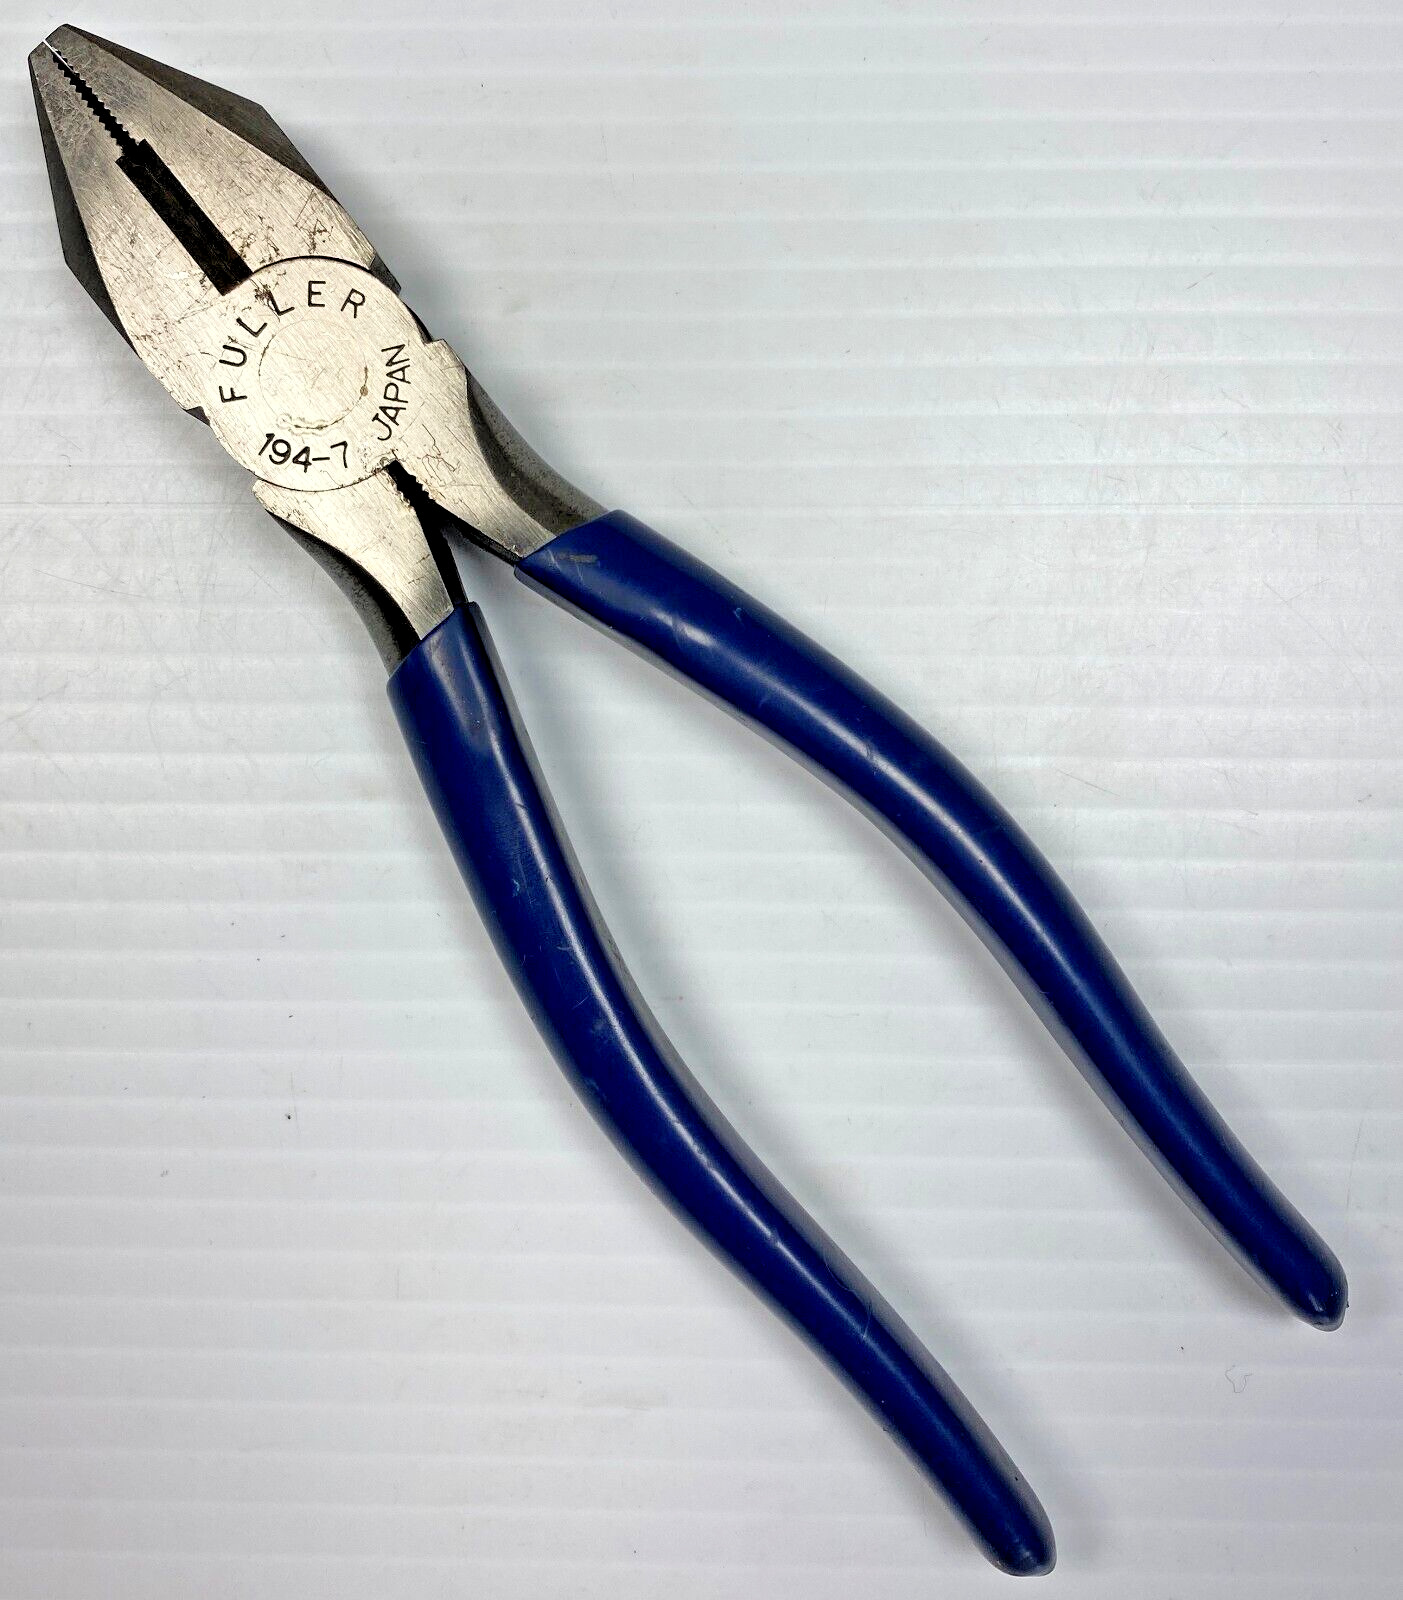 Vintage Fuller Tools 194-7 Lineman\'s Pliers with Blue Grips Made in Japan Tool